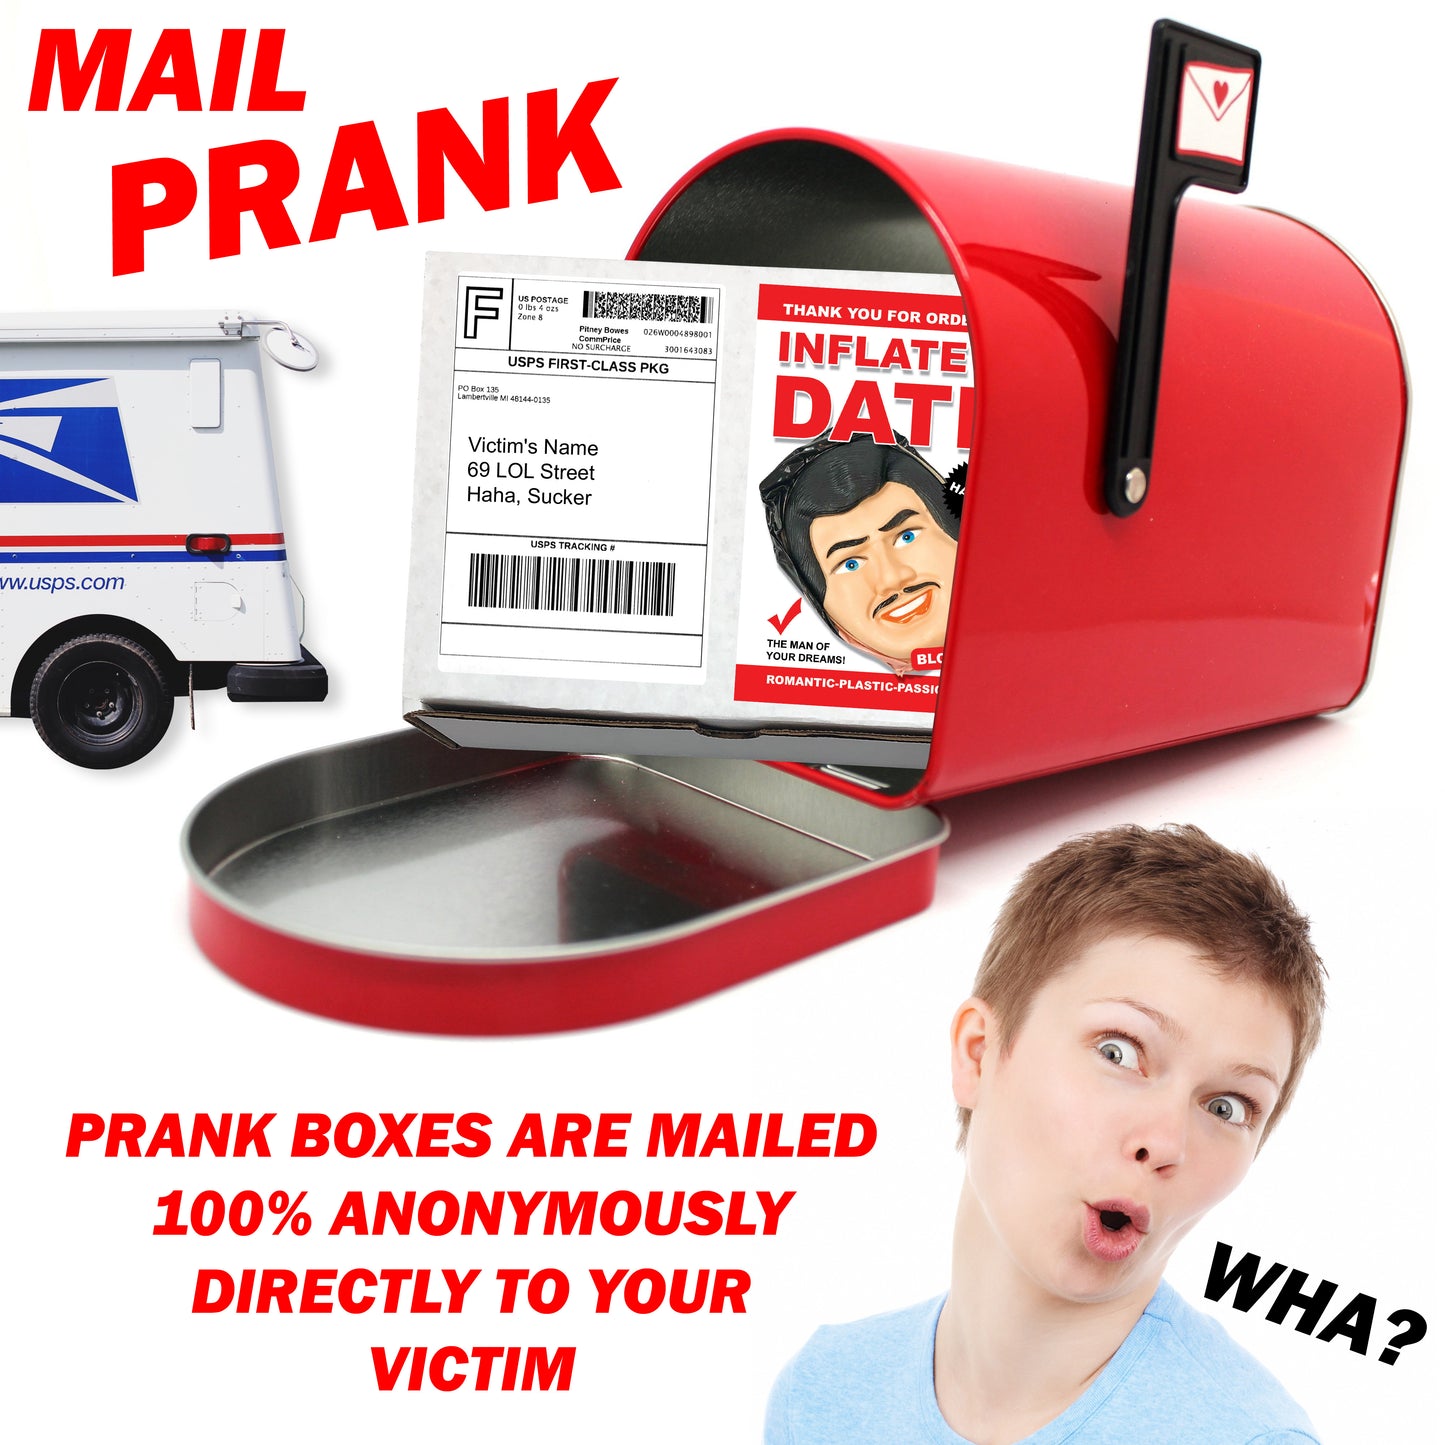 Inflate a Date Prank Mail